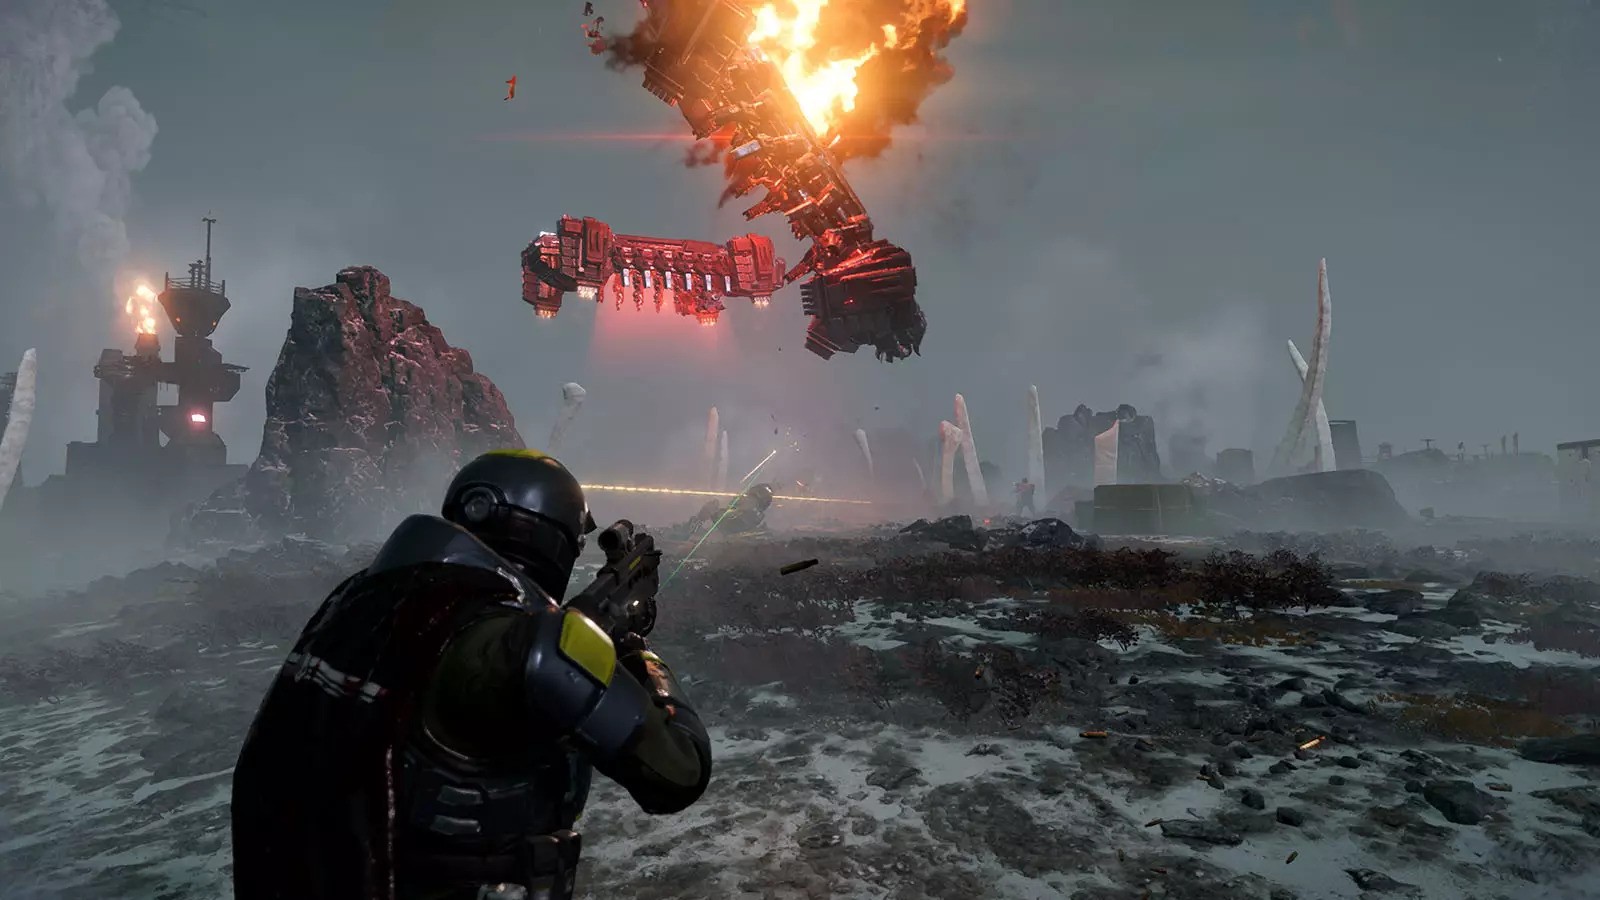 An armored soldier pointing a gun at an exploding ship falling from the sky.